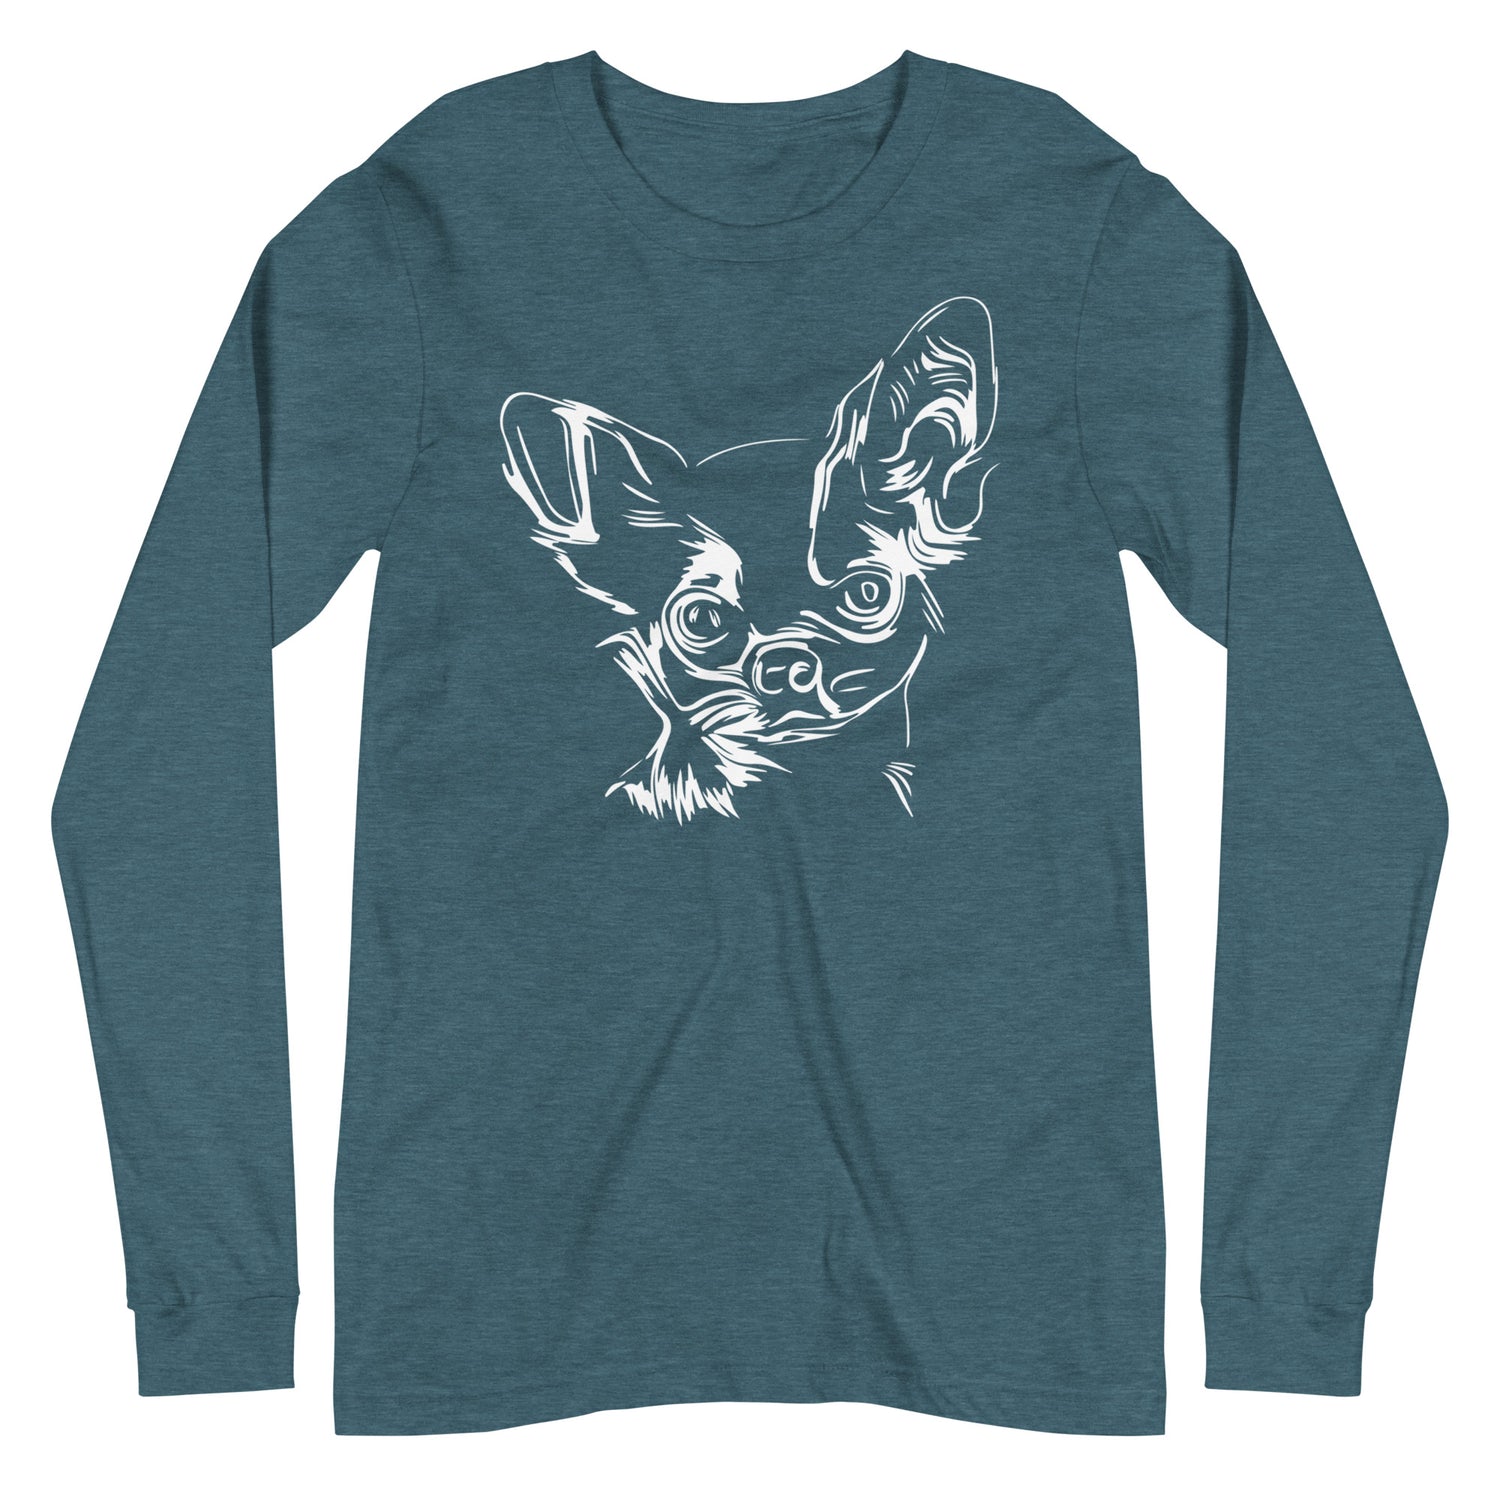 White line Chihuahua face on unisex heather deep teal long sleeve t-shirt